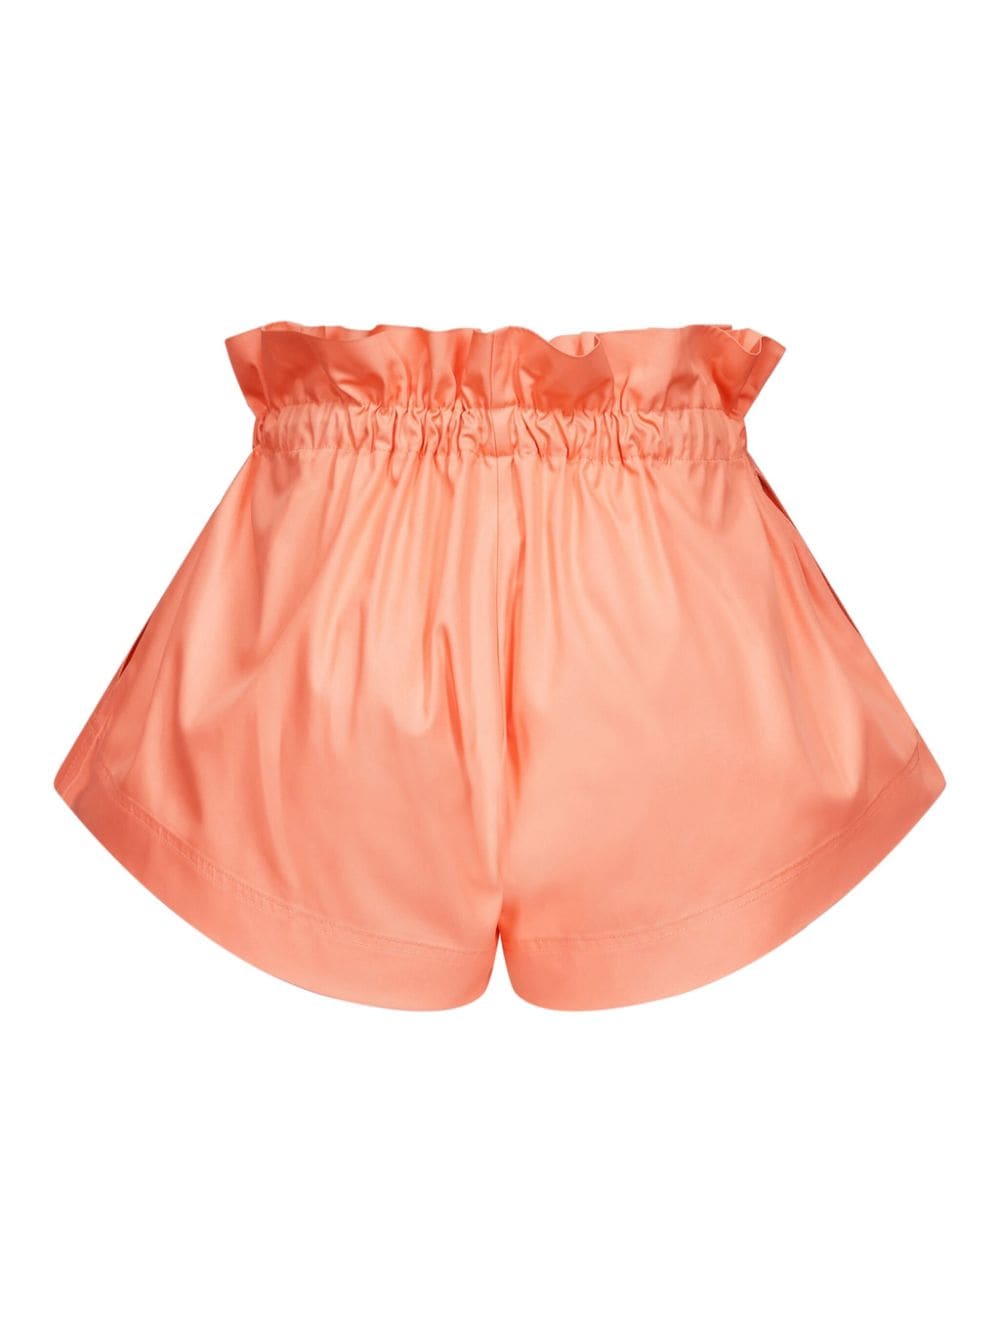 AREA Trainingsshorts met ruche taille - Roze